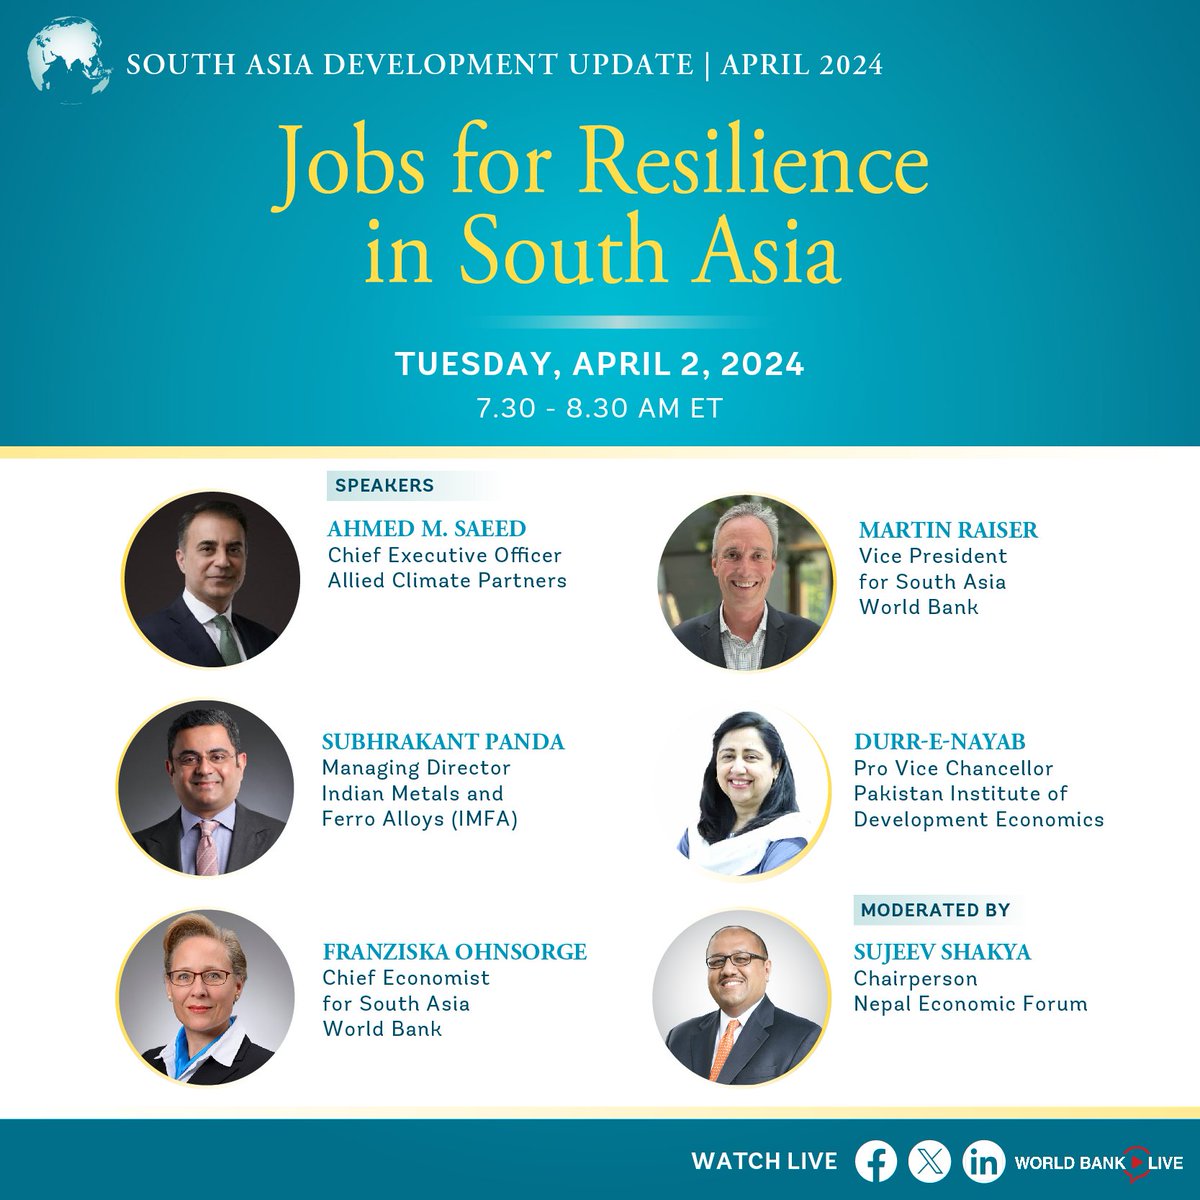 A fantastic conversation about enhancing growth and resilience in #SouthAsia featuring @MartinRaiser, @ahmed_m_saeed, Dr. Durre Nayab @durre_nayab_ from @PIDEpk, @subhrakantpanda, @sujeevshakya, and Franziska Ohnsorge. Tune in online: wrld.bg/NKYc50QX4sA